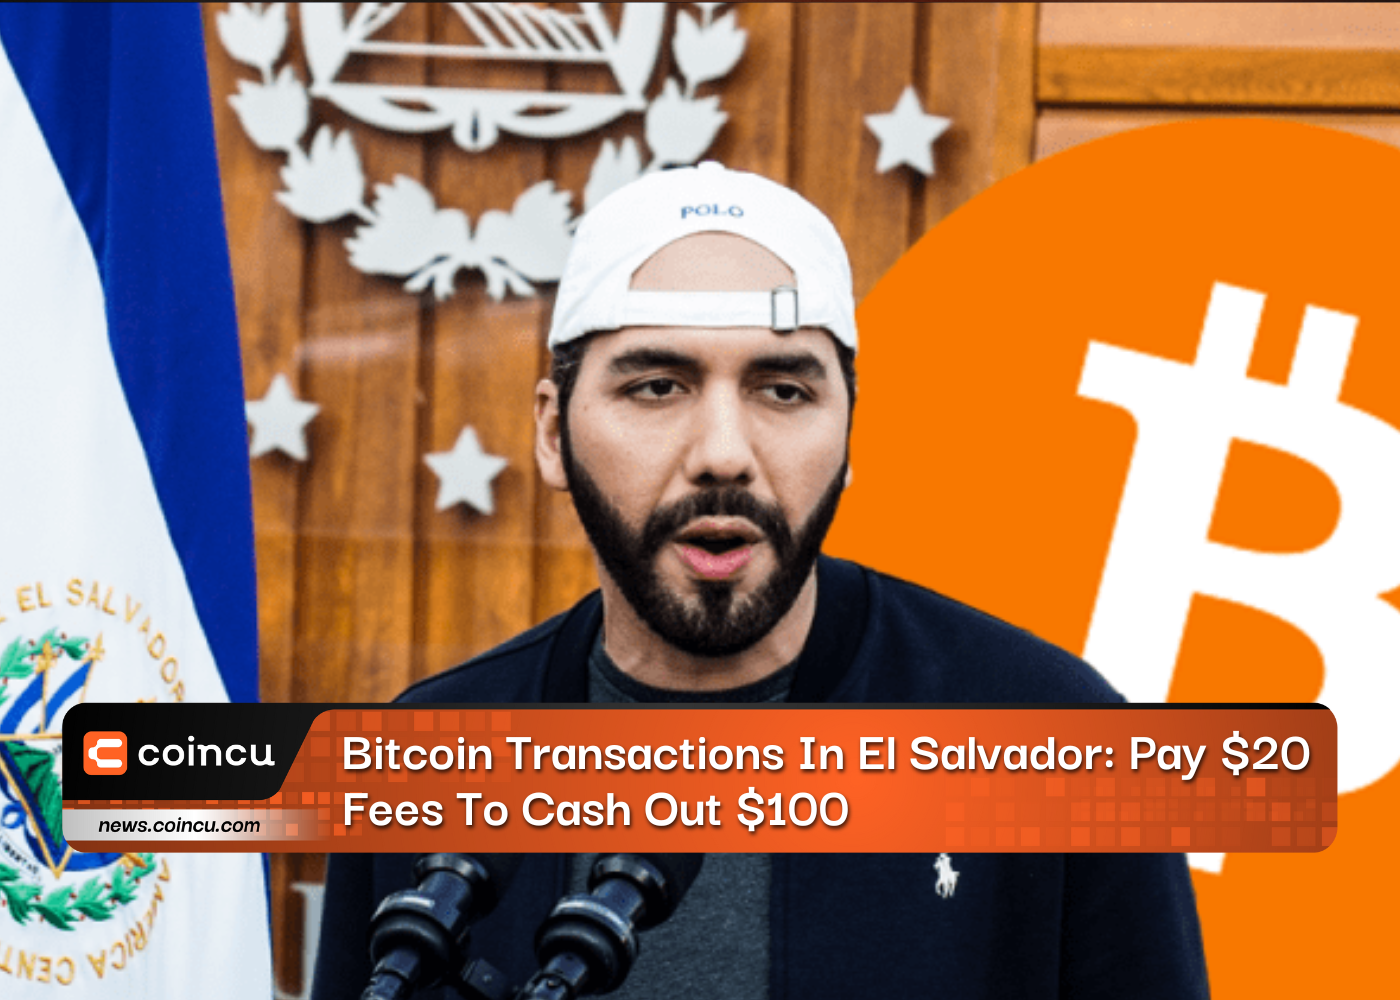 Bitcoin Transactions In El Salvador: Pay $20 Fees To Cash Out $100